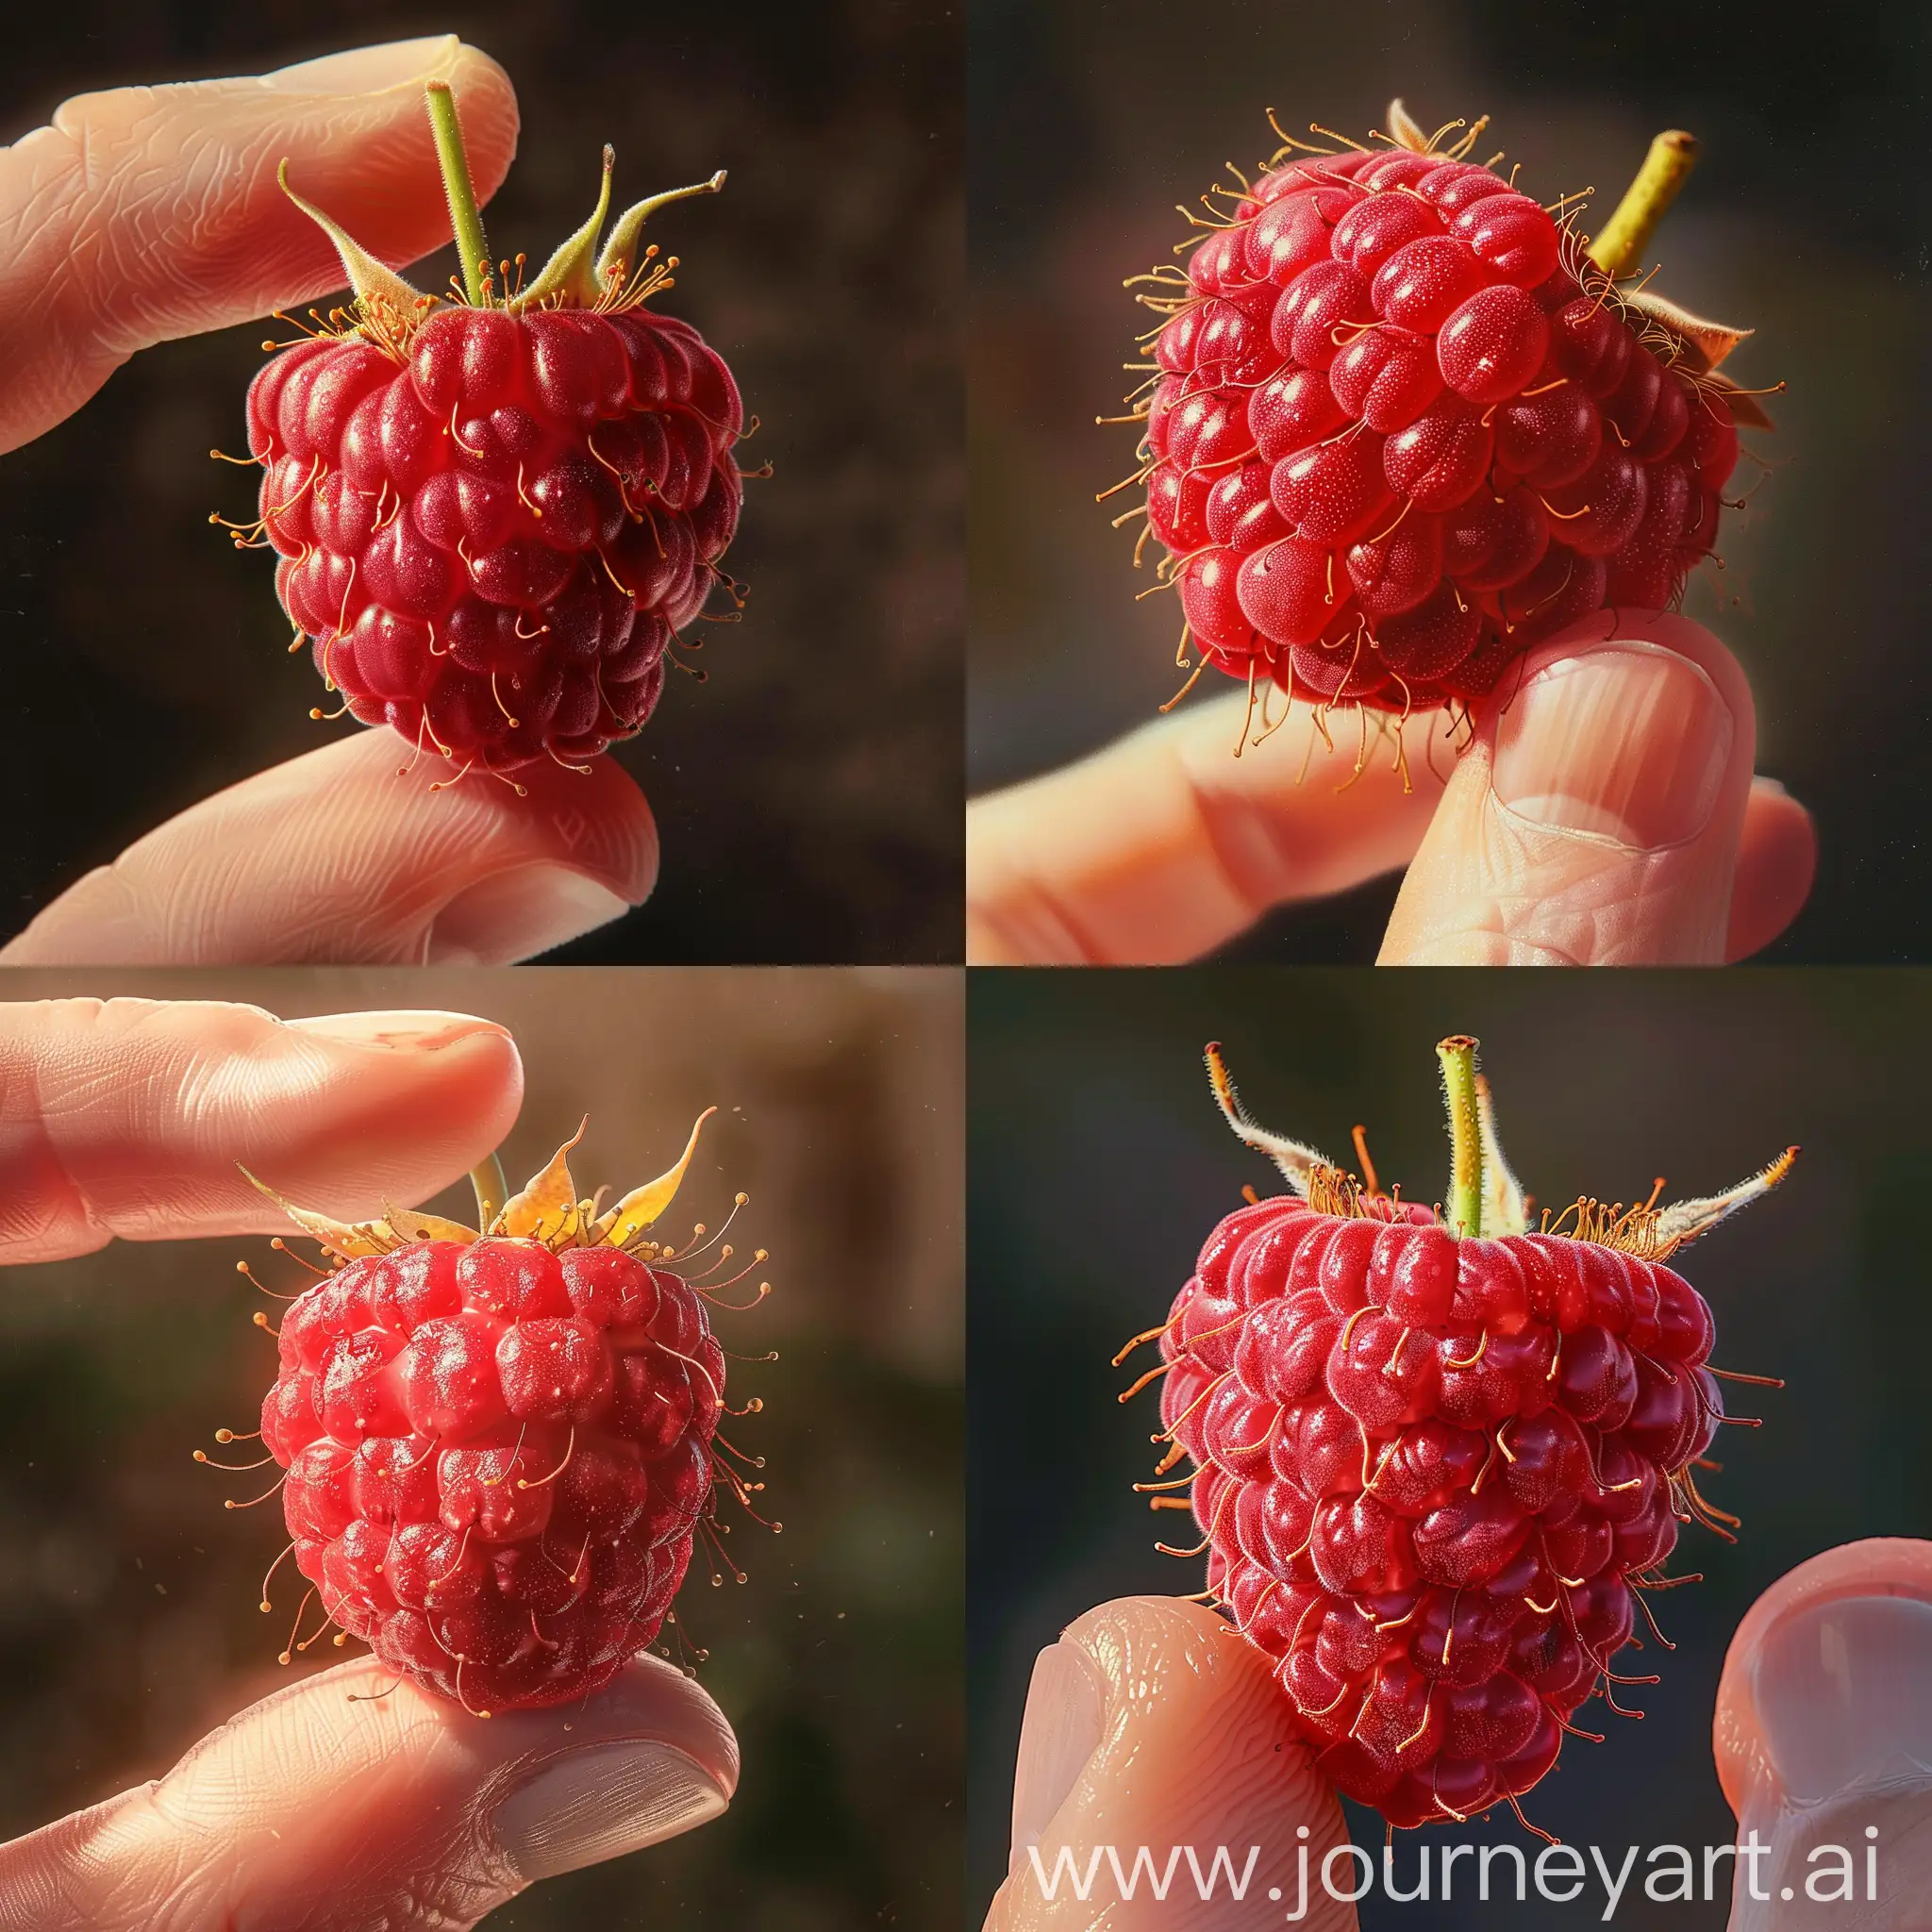 A single, ripe raspberry is the subject of this image, presented in vivid detail. Each individual drupelet, plump and glistening with moisture, stands out in a rich, red colour that suggests a juicy and fresh quality. The raspberry is delicately held between the thumb and forefinger, which have neatly manicured nails and appear soft, adding a human element to the composition. The background is deliberately blurred, ensuring the raspberry commands the viewer's focus. Additional elements, like the fine hairs on the drupelets that catch the light, contribute to the tactile realism of the fruit. The soft shadows cast by the fingers create an effect of depth. Overall, the composition is an intimate and detailed celebration of natural simplicity, emphasising the texture and freshness of the raspberry.